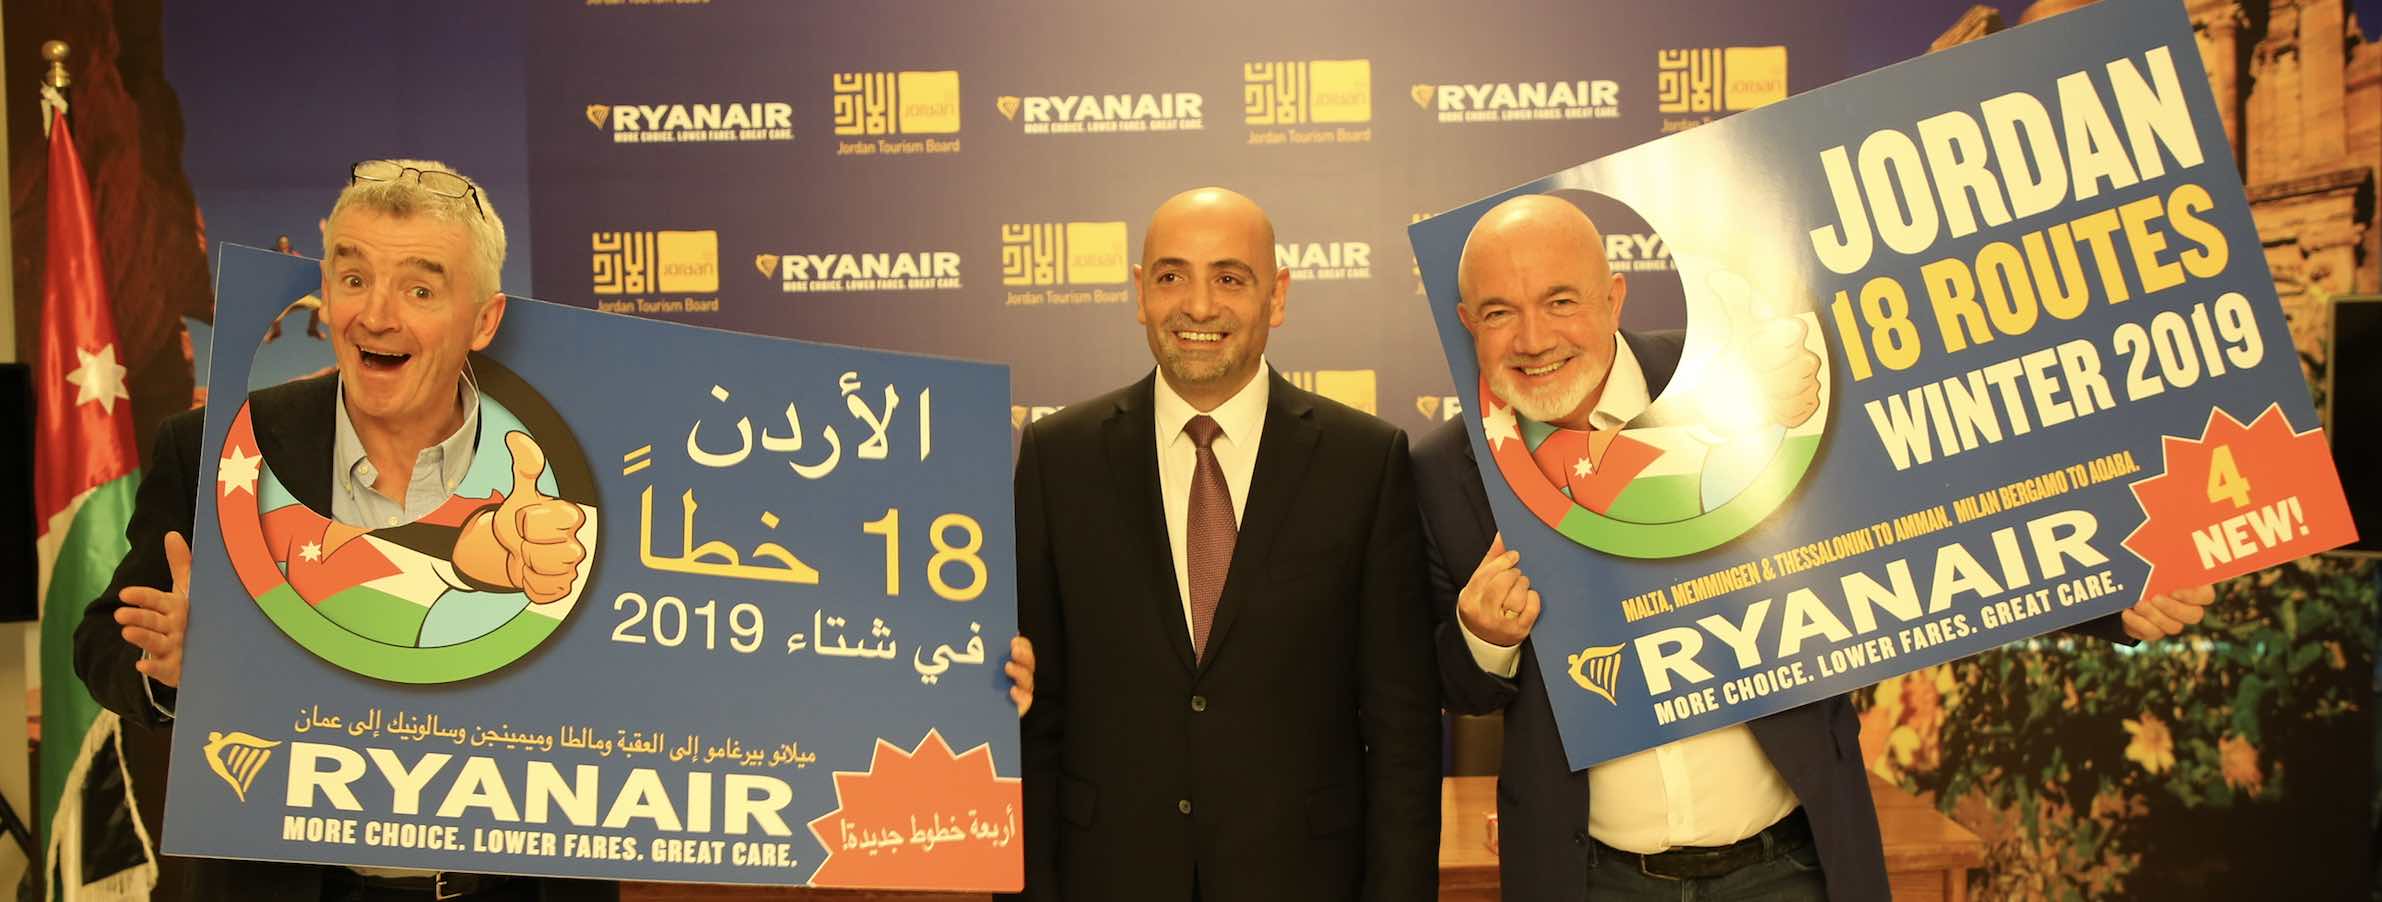 RYANAIR LAUNCHES 4 NEW JORDAN ROUTES FOR WINTER 2019